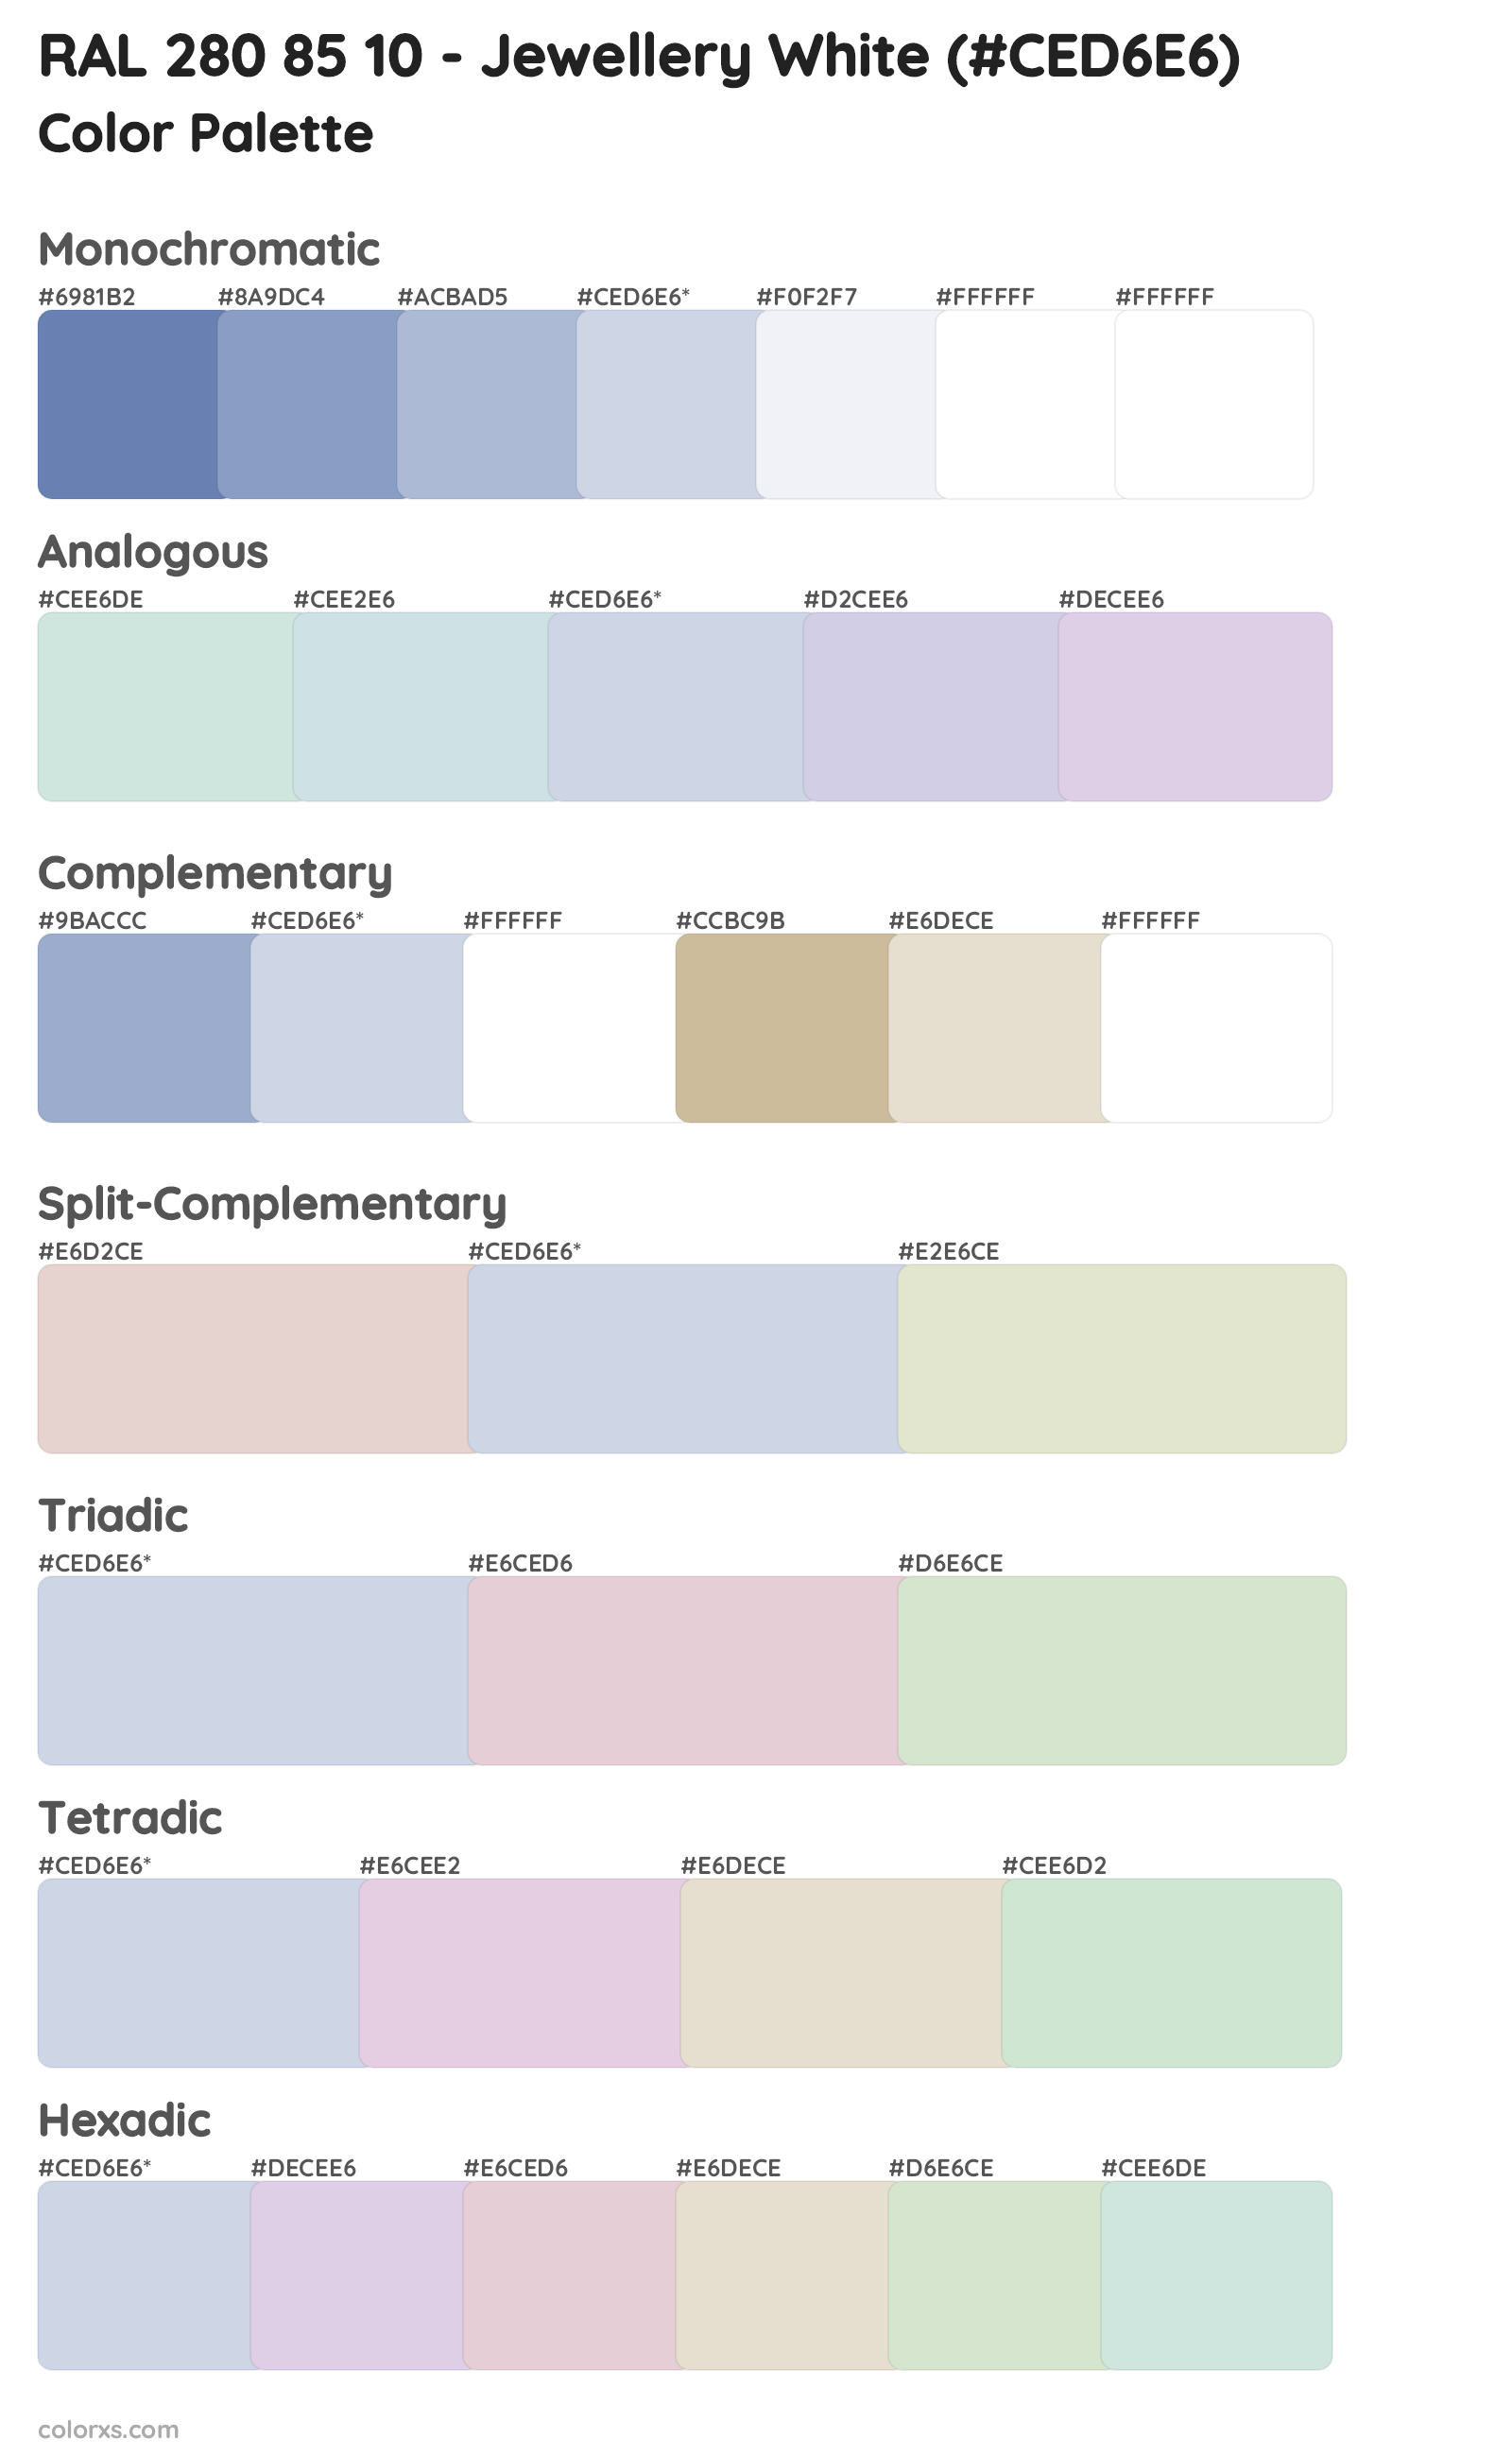 RAL 280 85 10 - Jewellery White Color Scheme Palettes